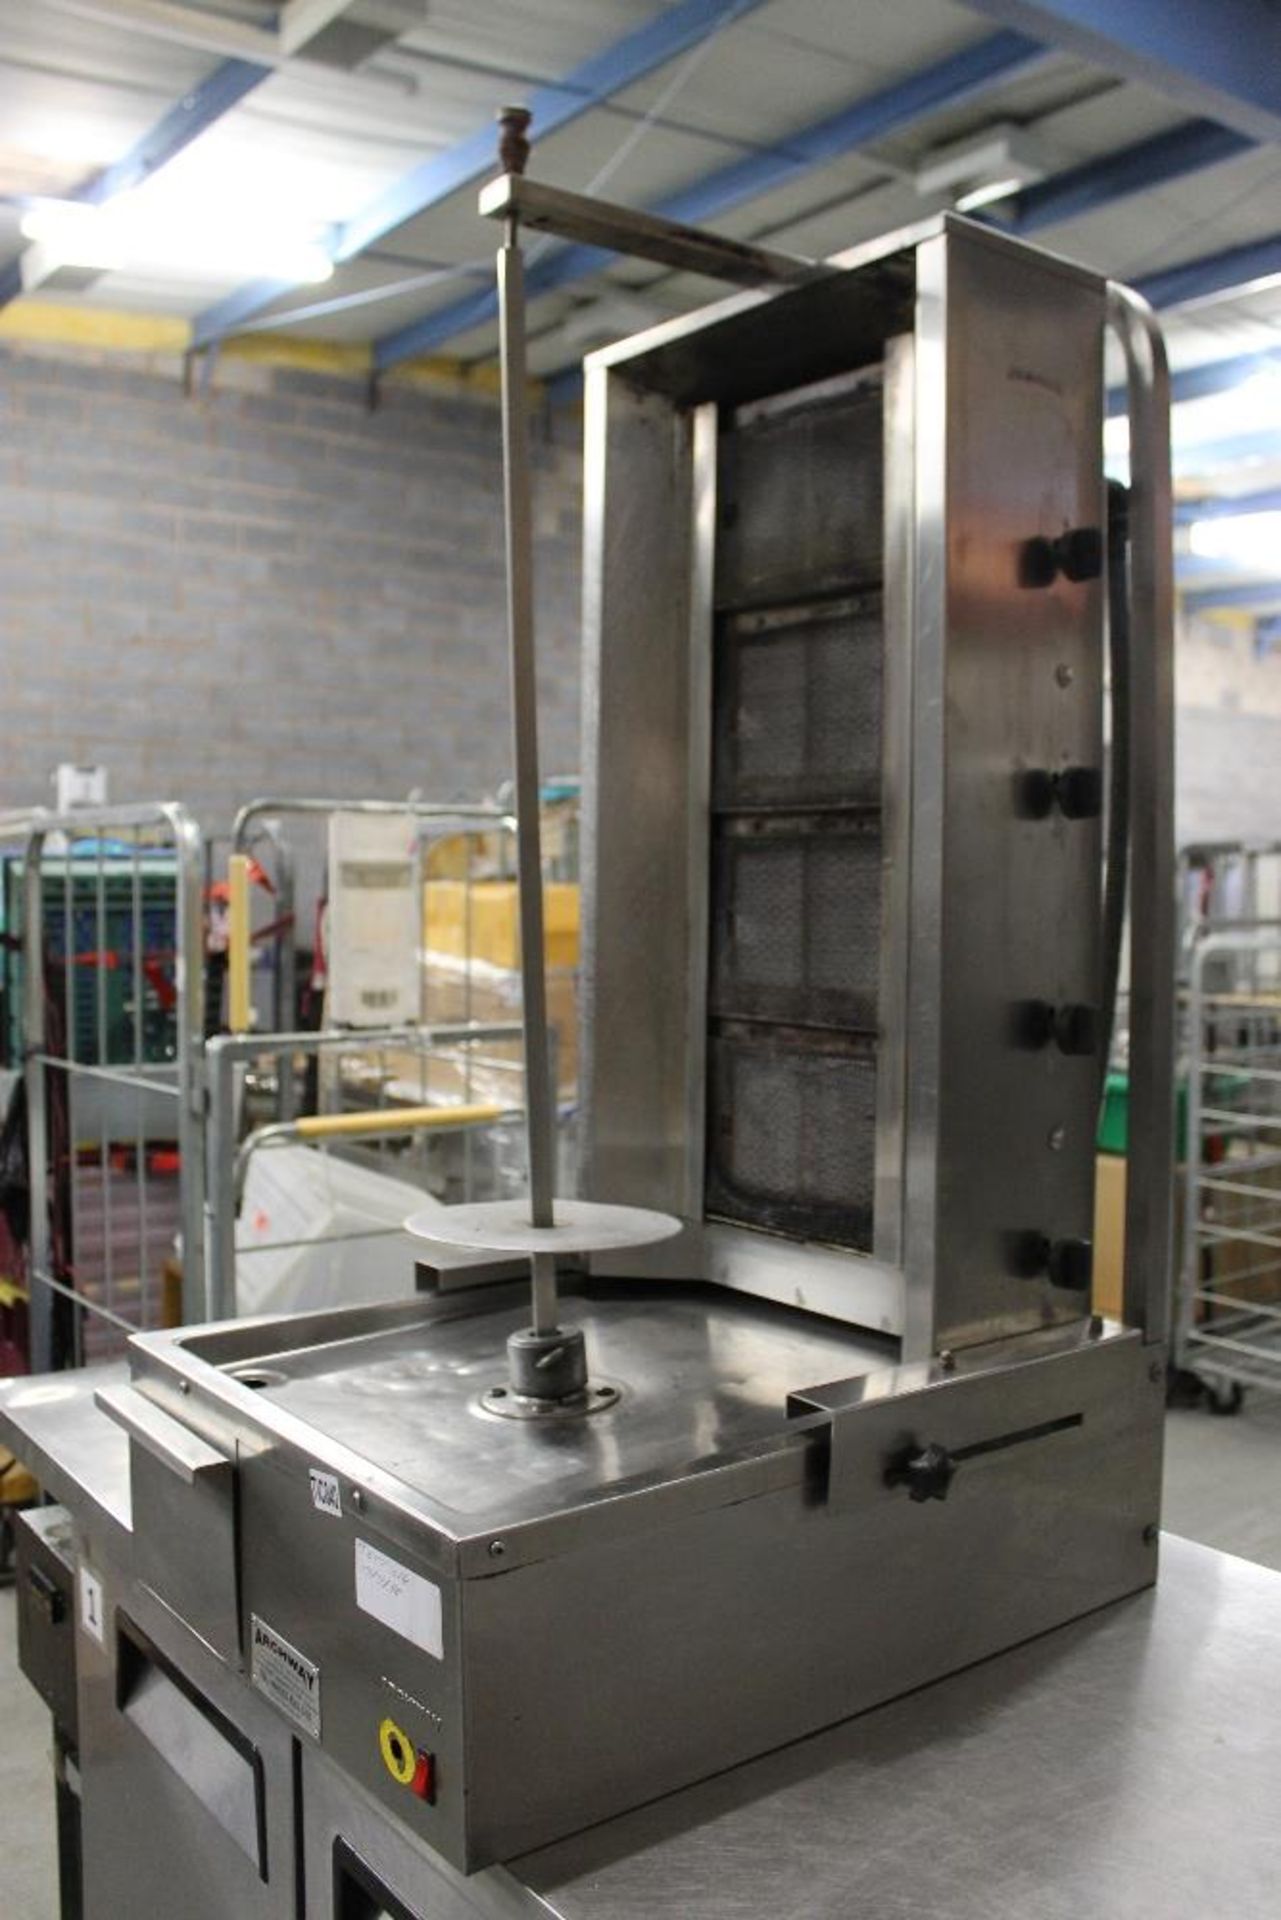 Archway Four Burner Kebab Machine – LPG Gas – also comes with Nat Gas Conversion Kit – Tested - Image 3 of 3